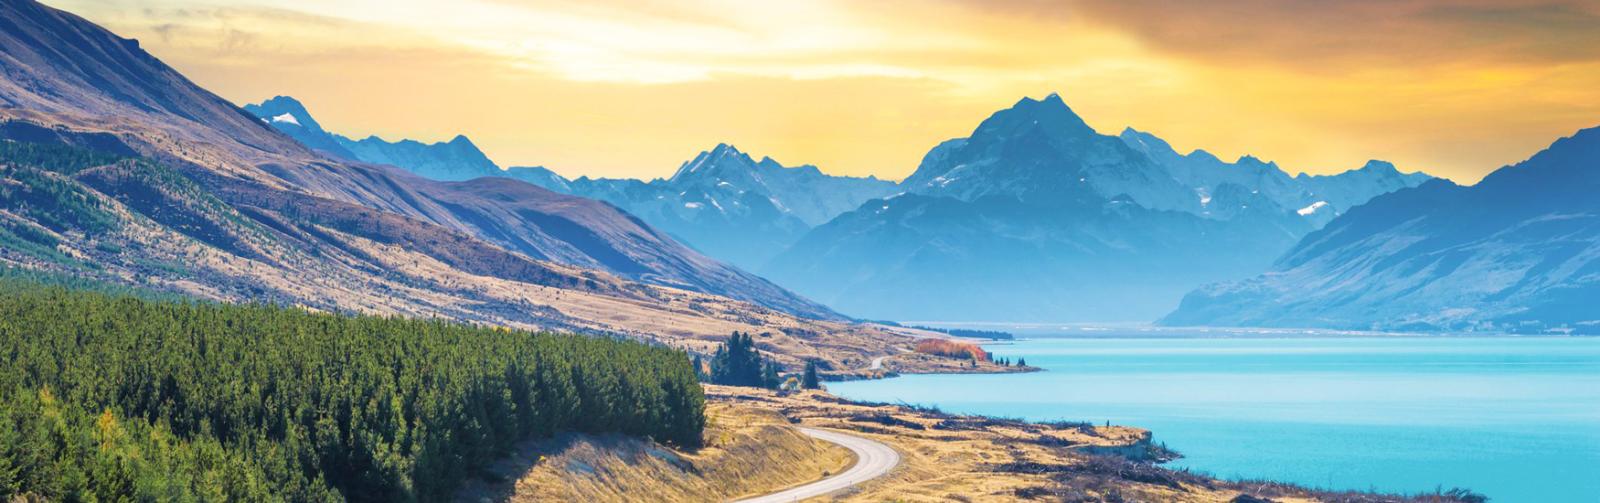 10 Day Highlights of the South Island Self Drive Tour